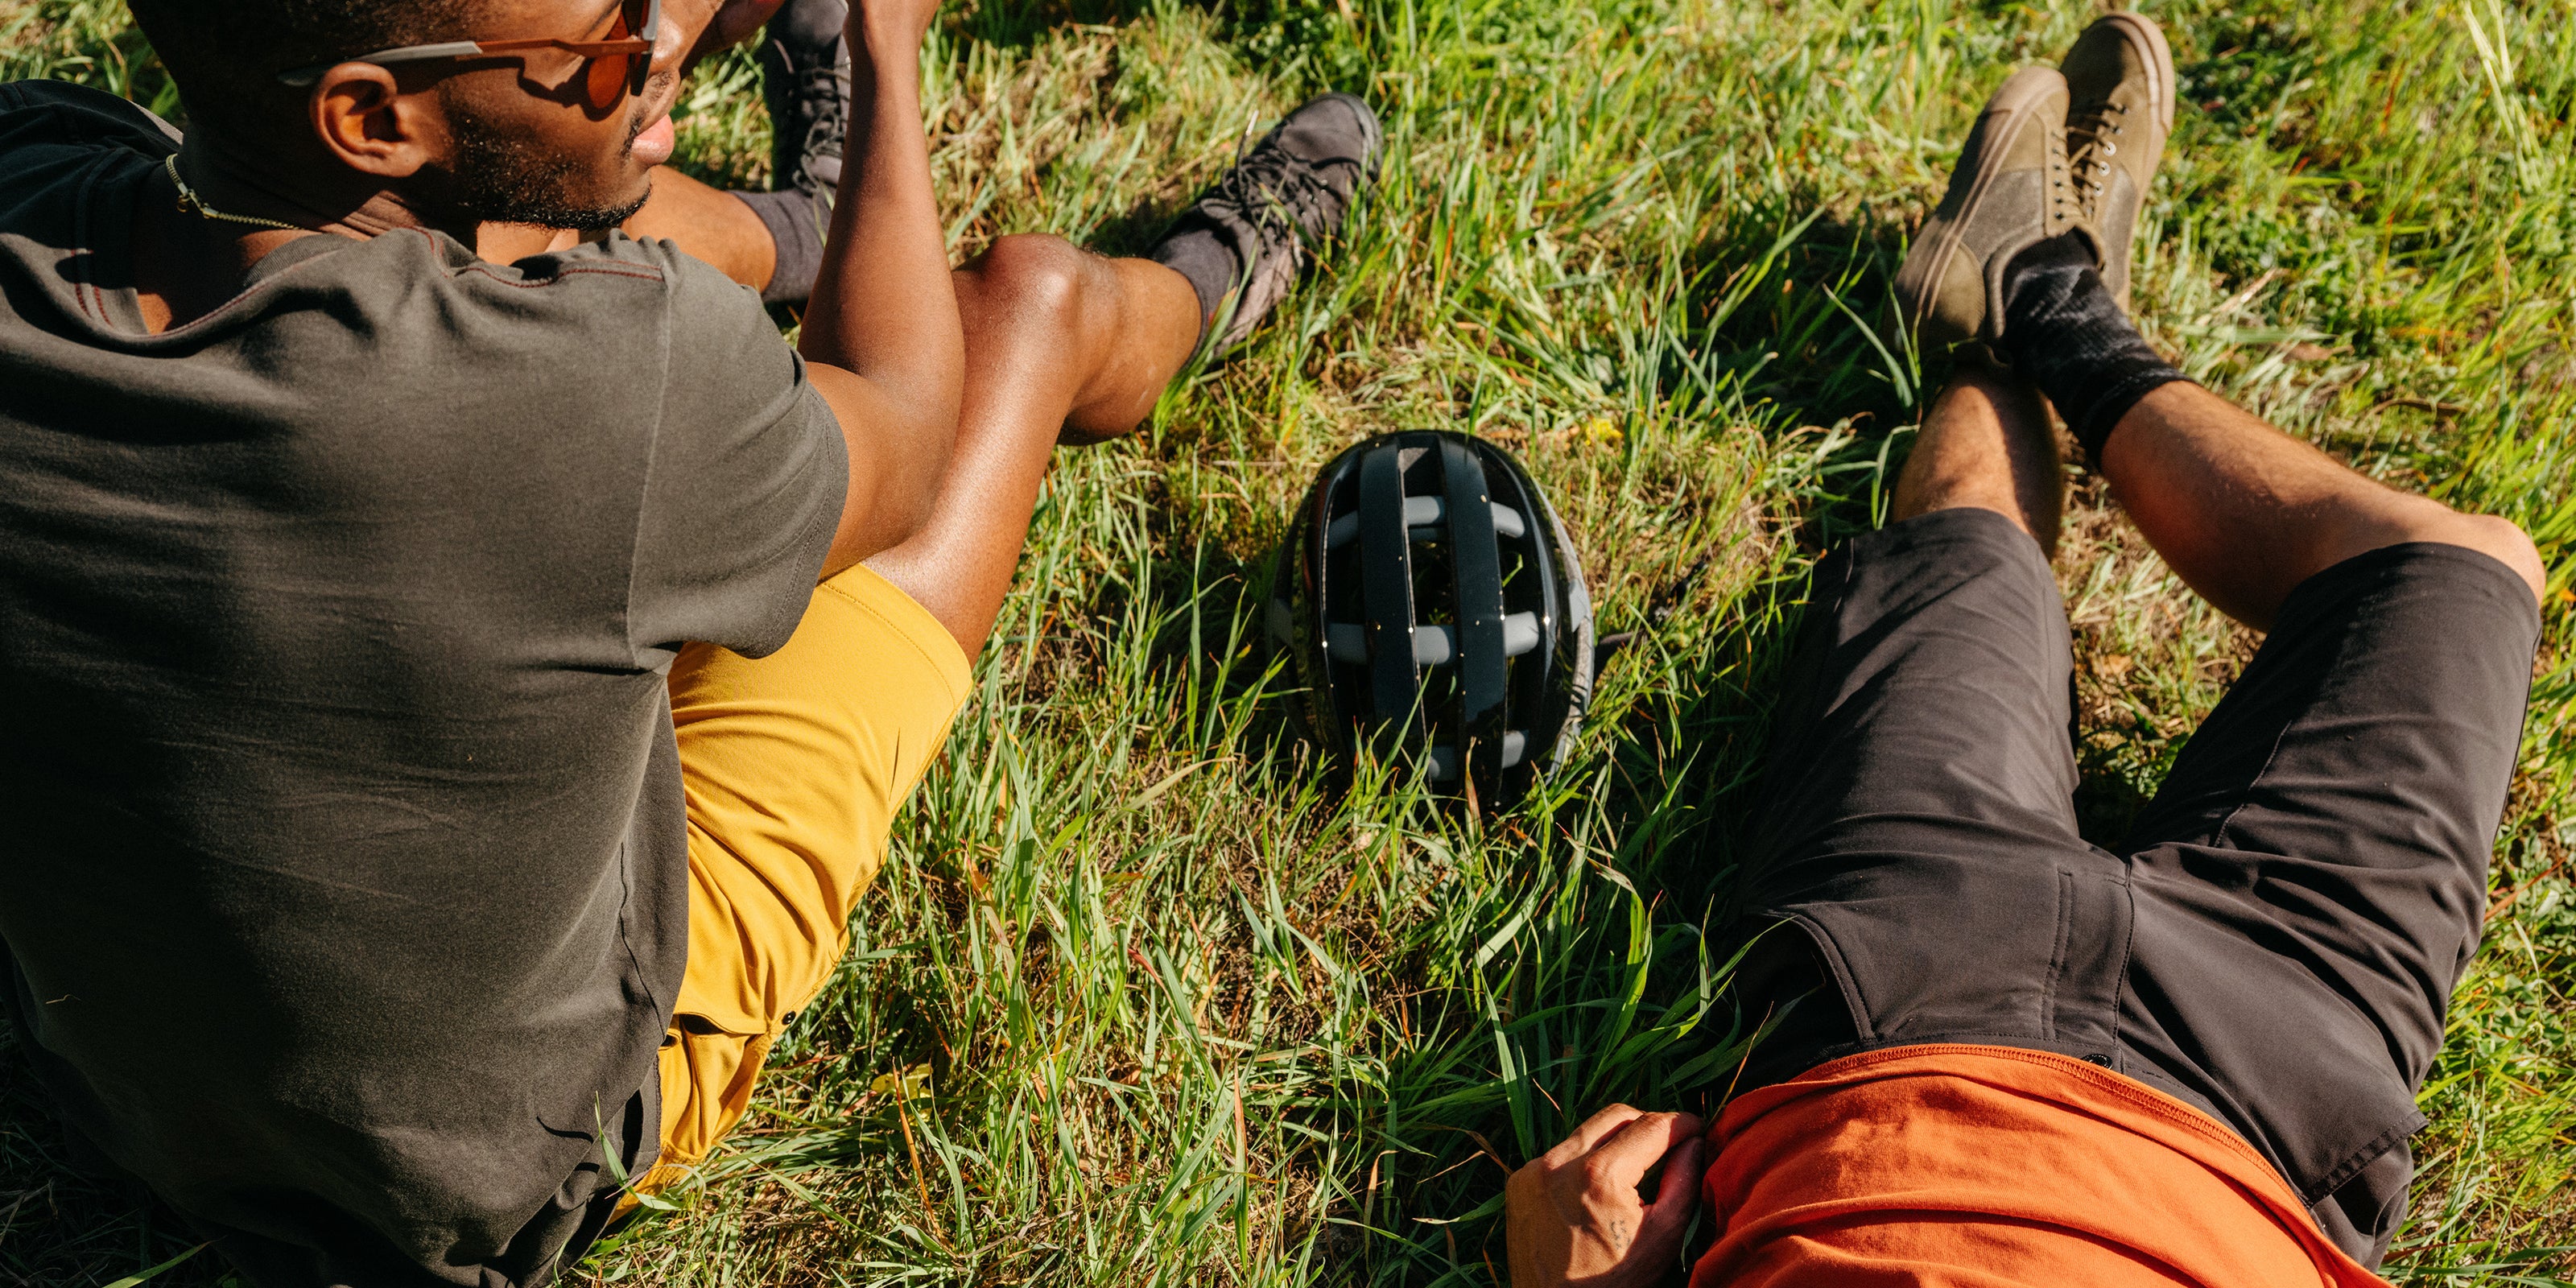 Men's Sutro Short worn by a guy laying in the grass desktop image size